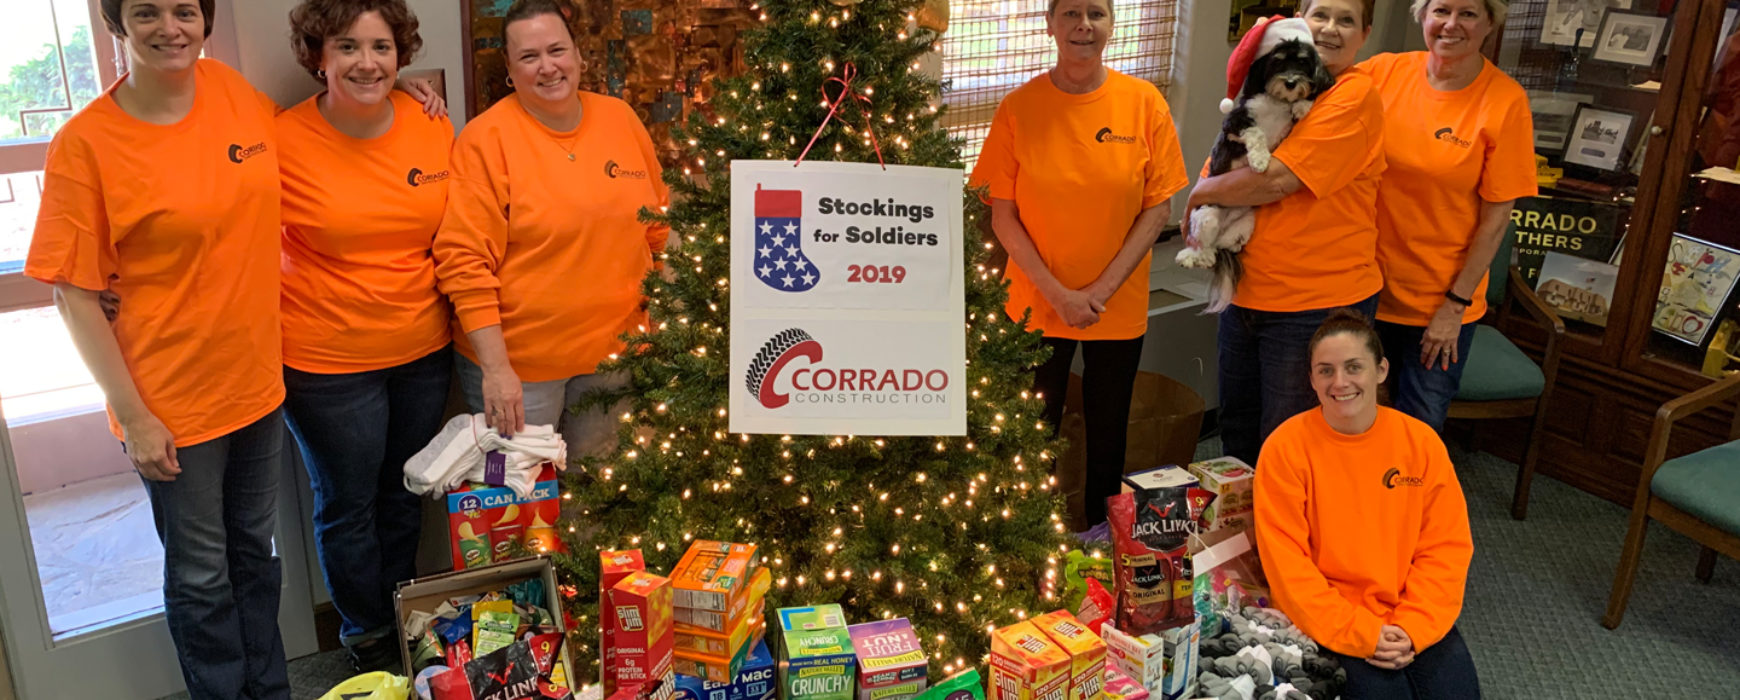 Stockings for Soldiers 2019